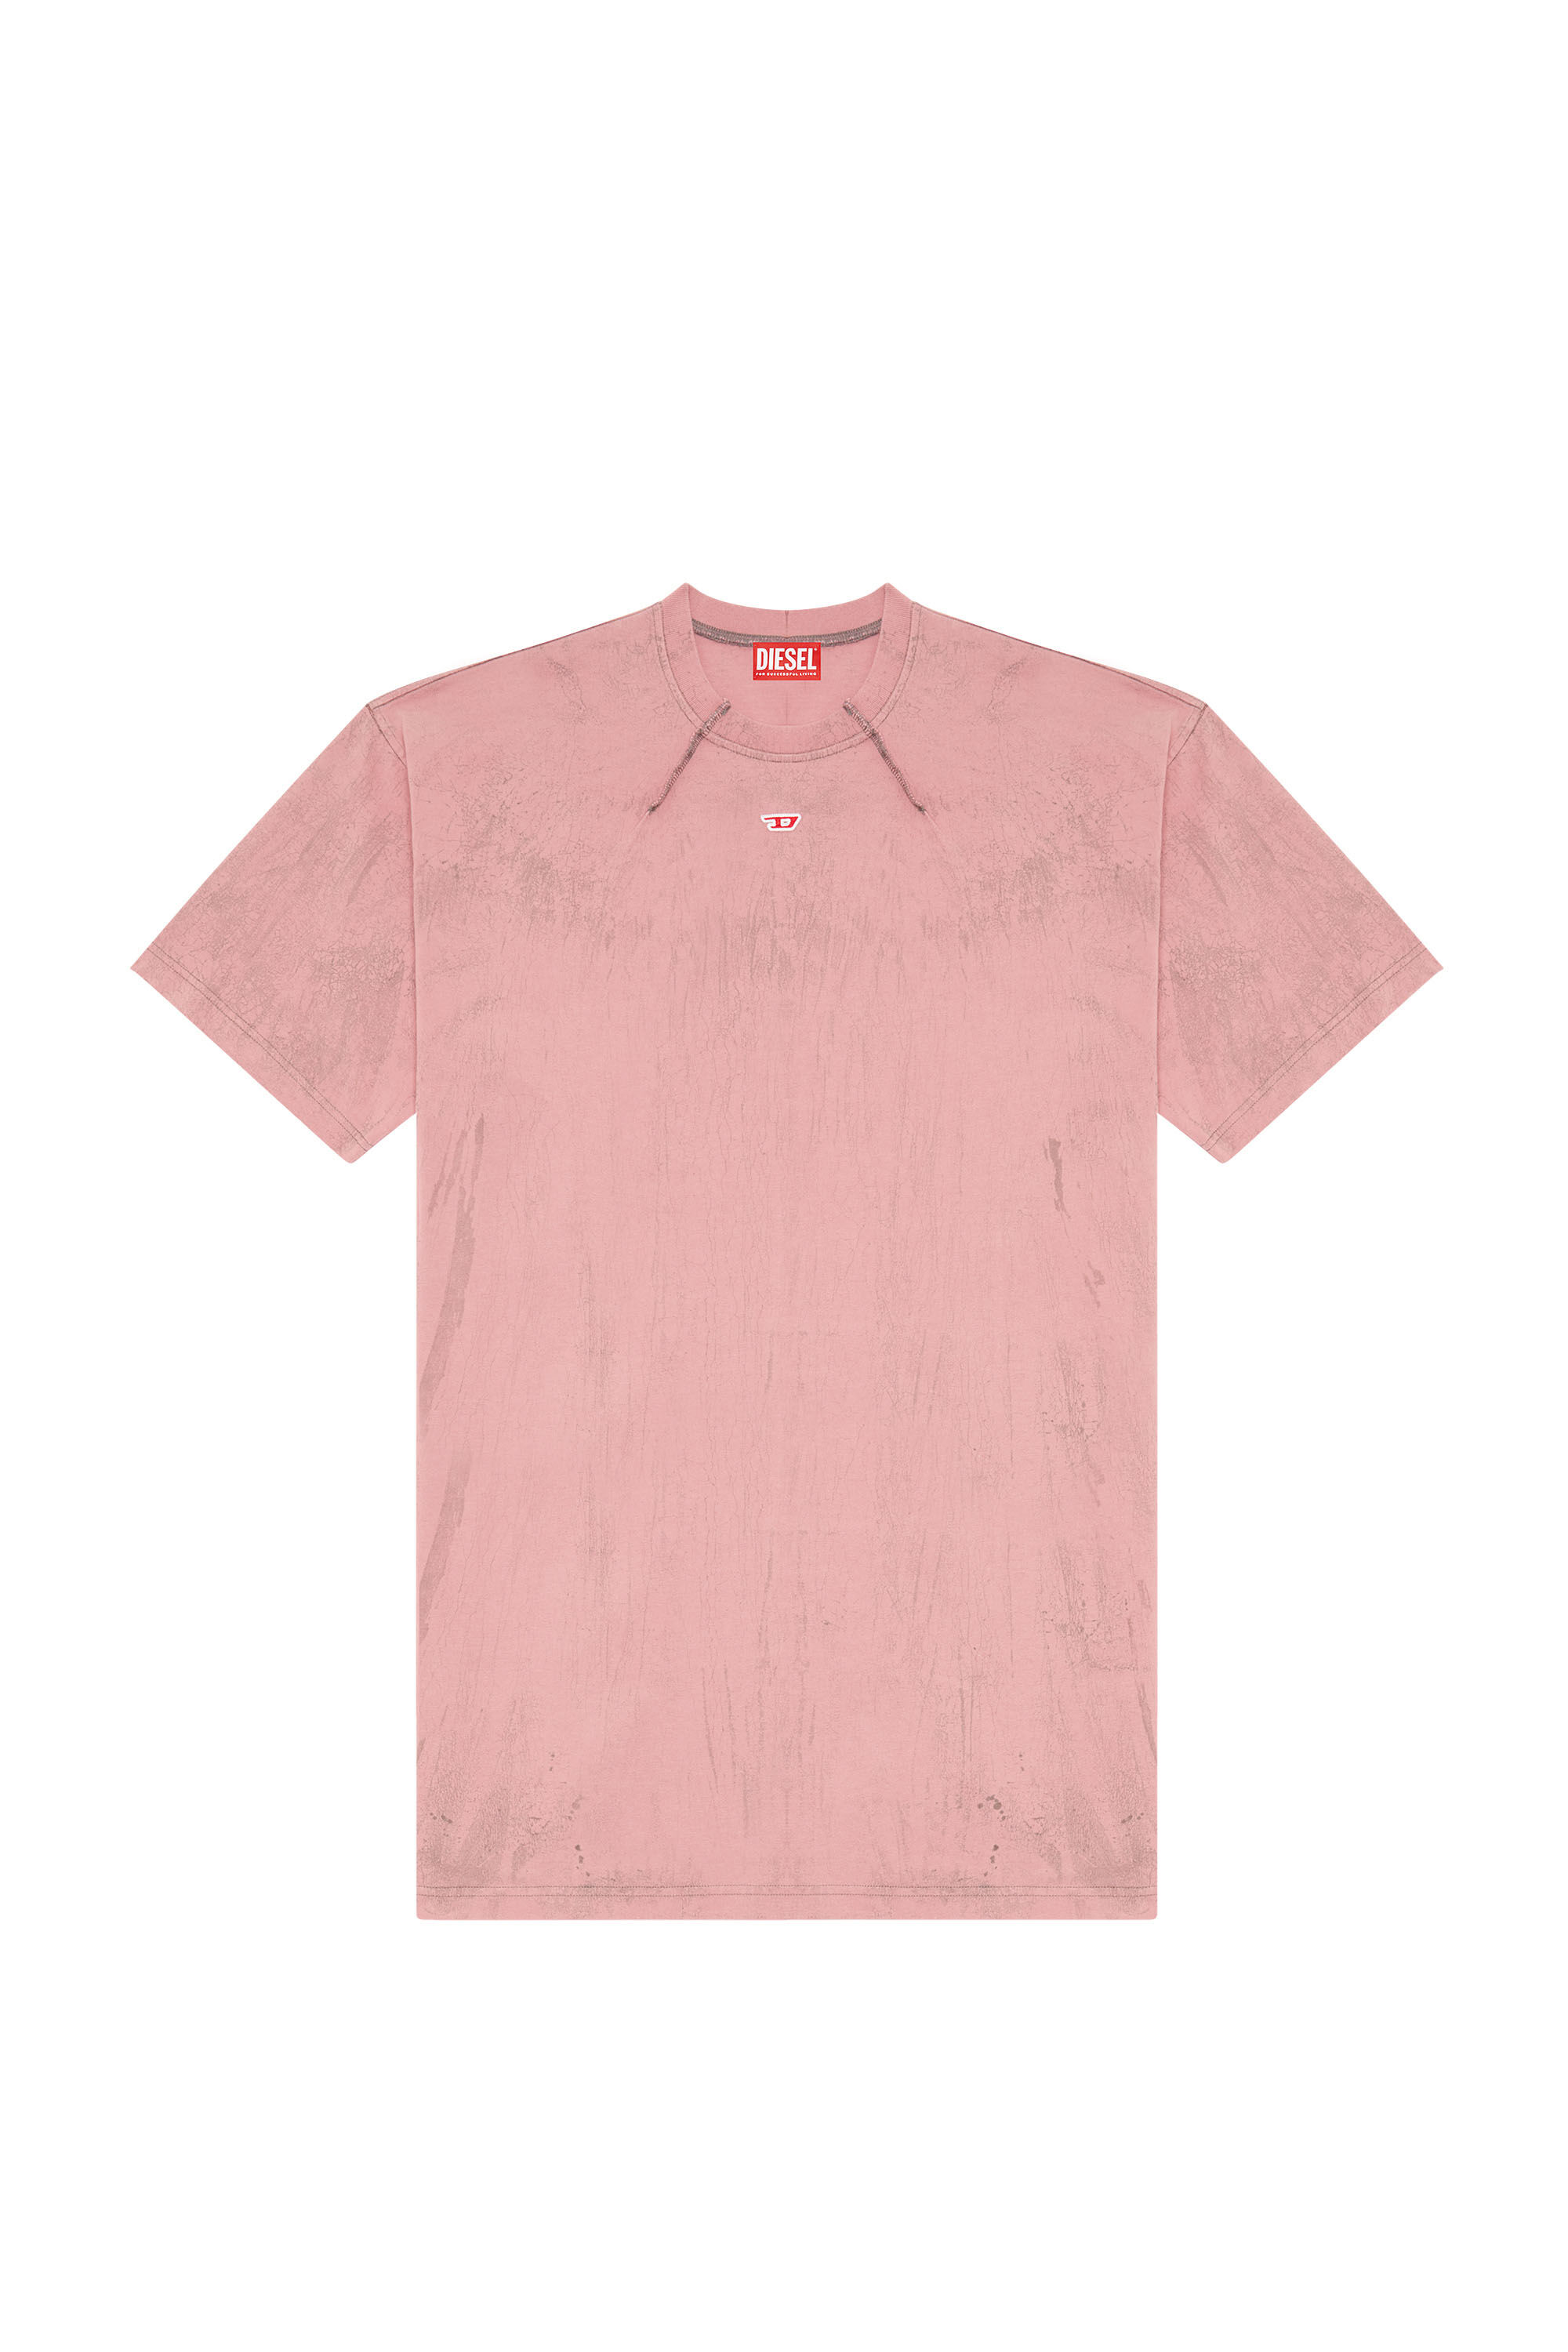 Diesel - T-COS, Uomo T-shirt in jersey effetto gesso in Rosa - Image 2